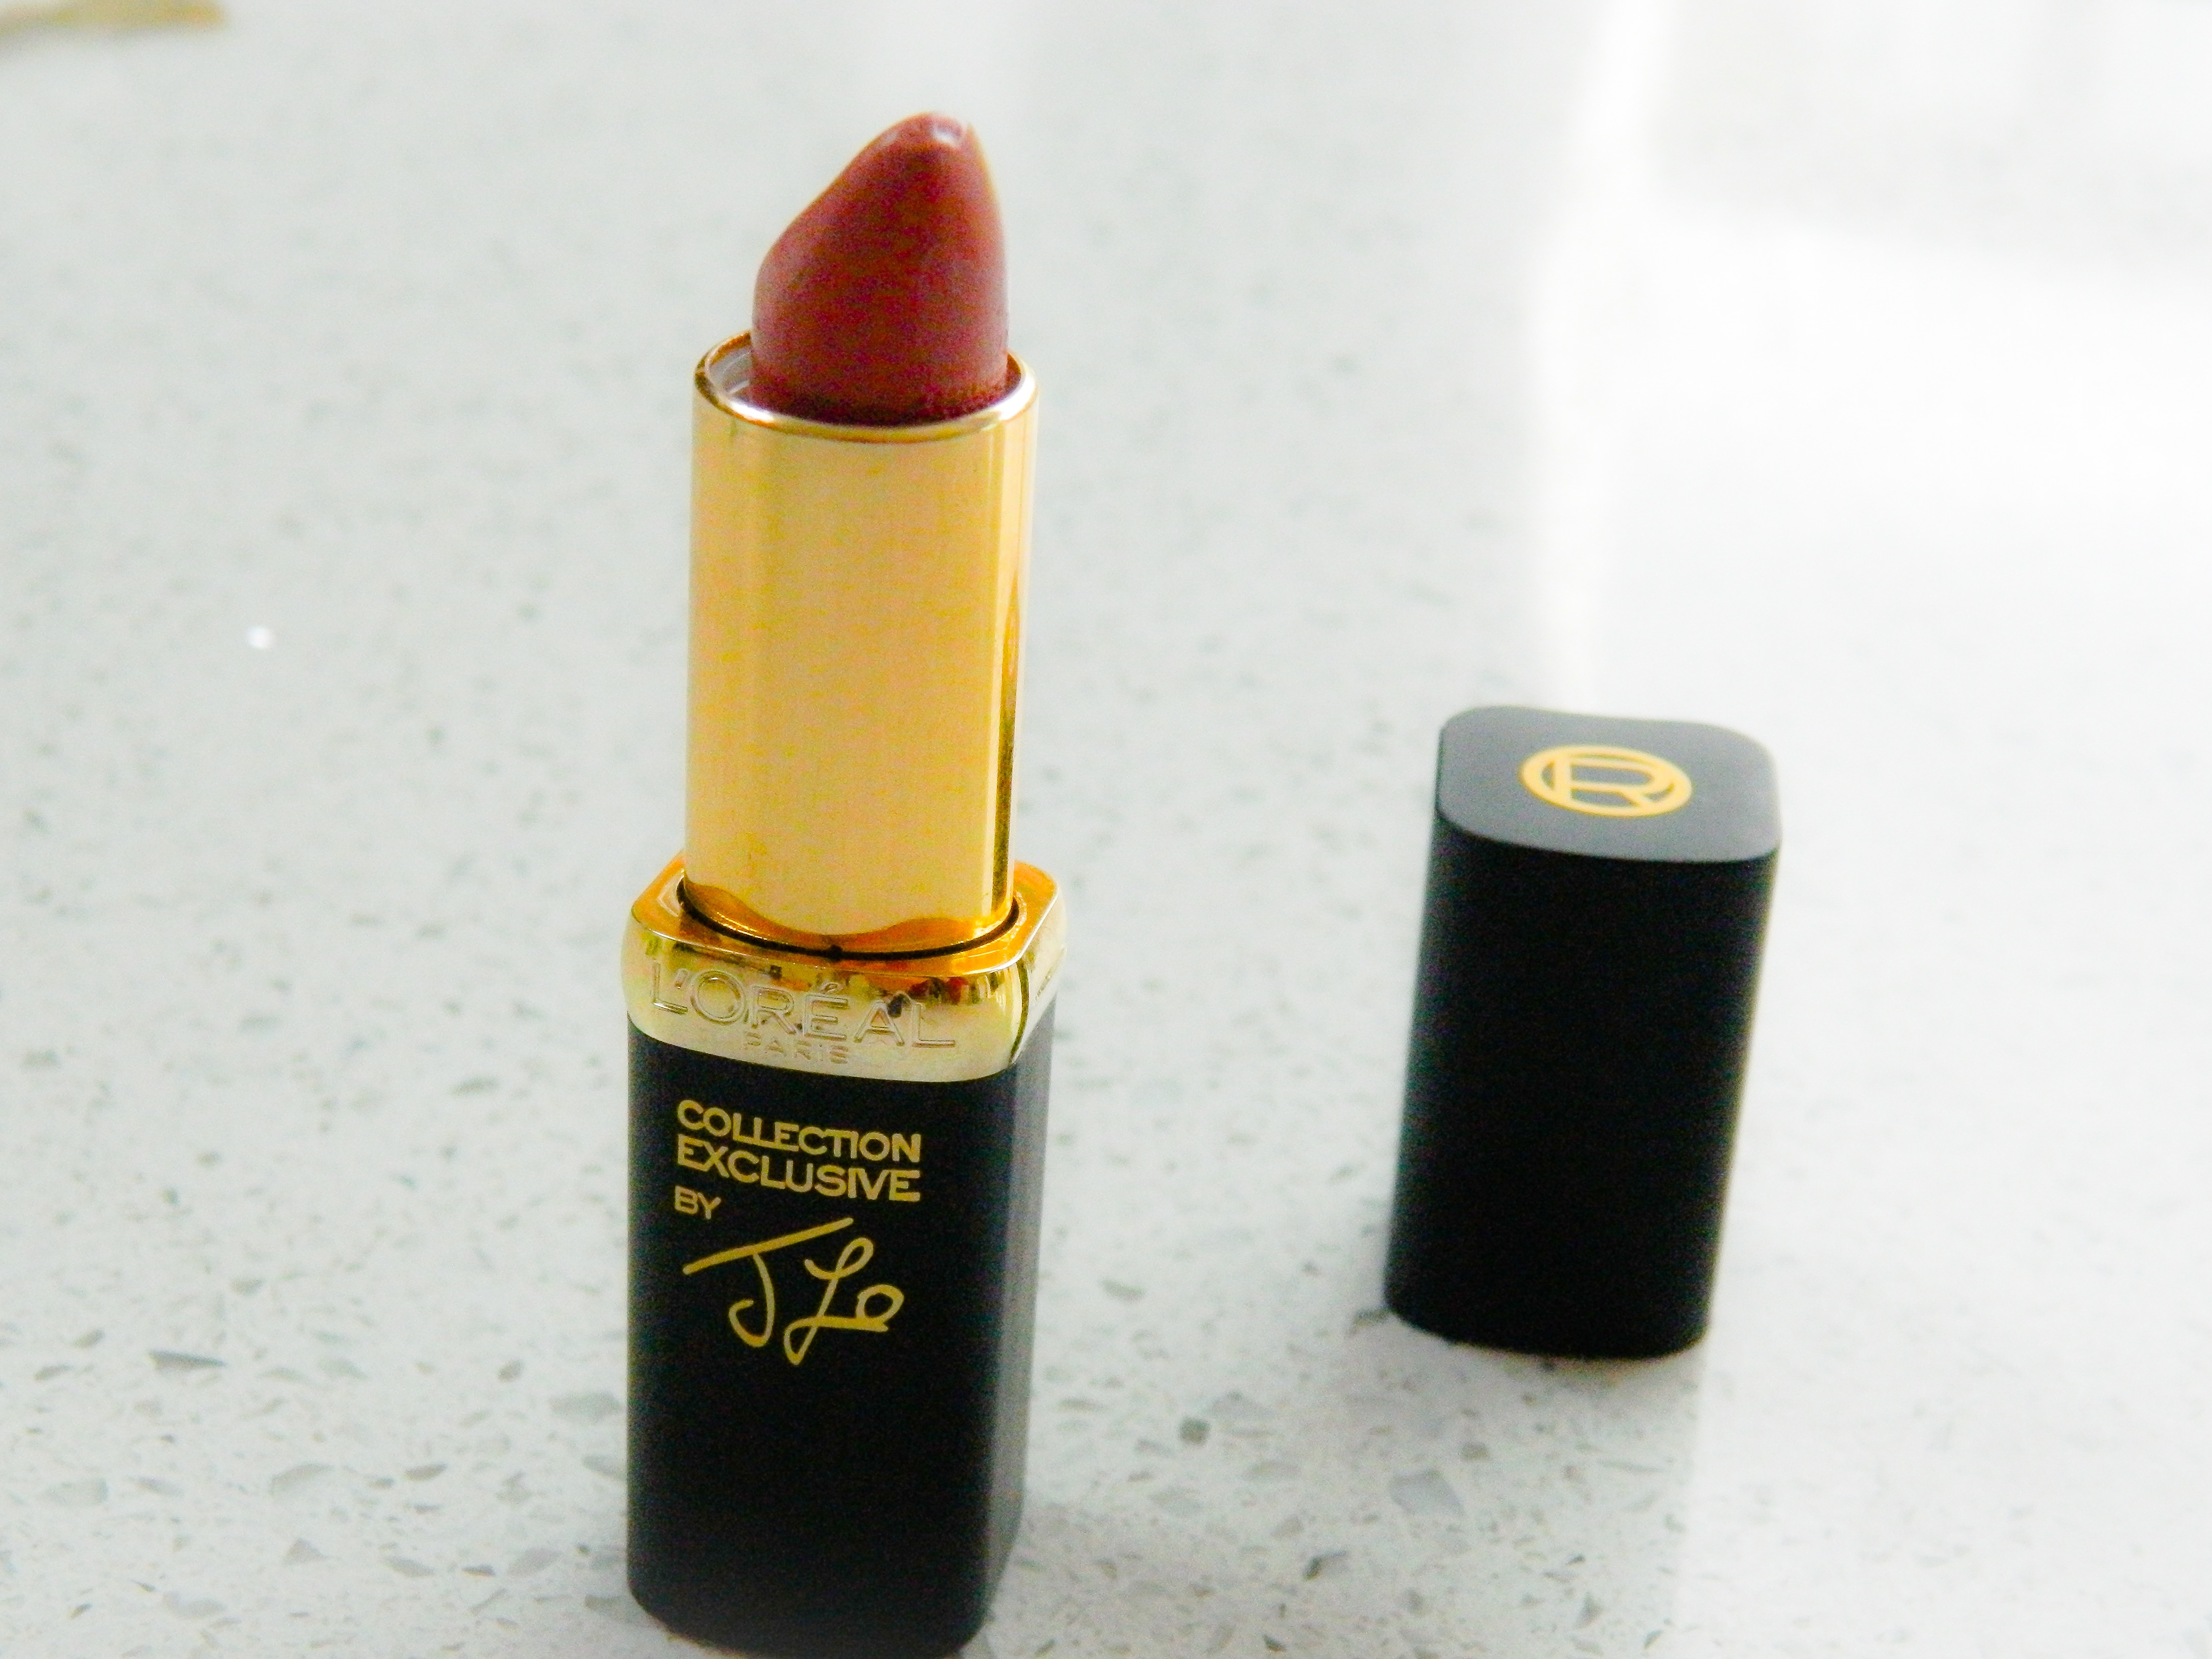 MY EVERYDAY LIPSTICKS – L’OREAL COLLECTION EXCLUSIVE